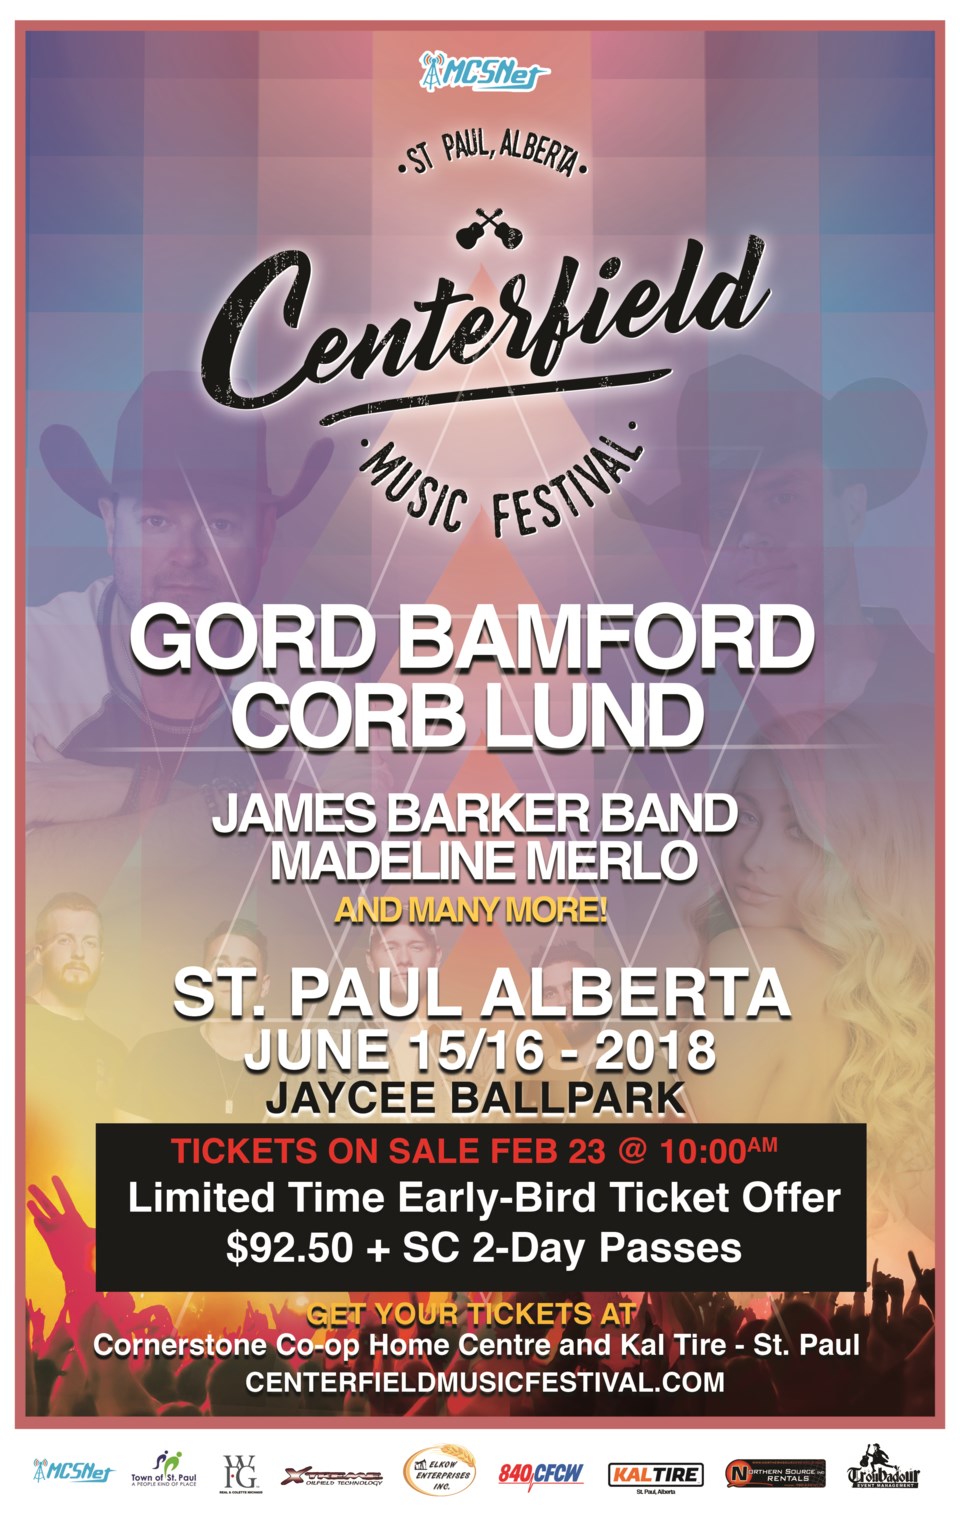 This year&#8217;s Centerfield Music Festival will see a few big country music names come to town over the June 15/16 weekend.